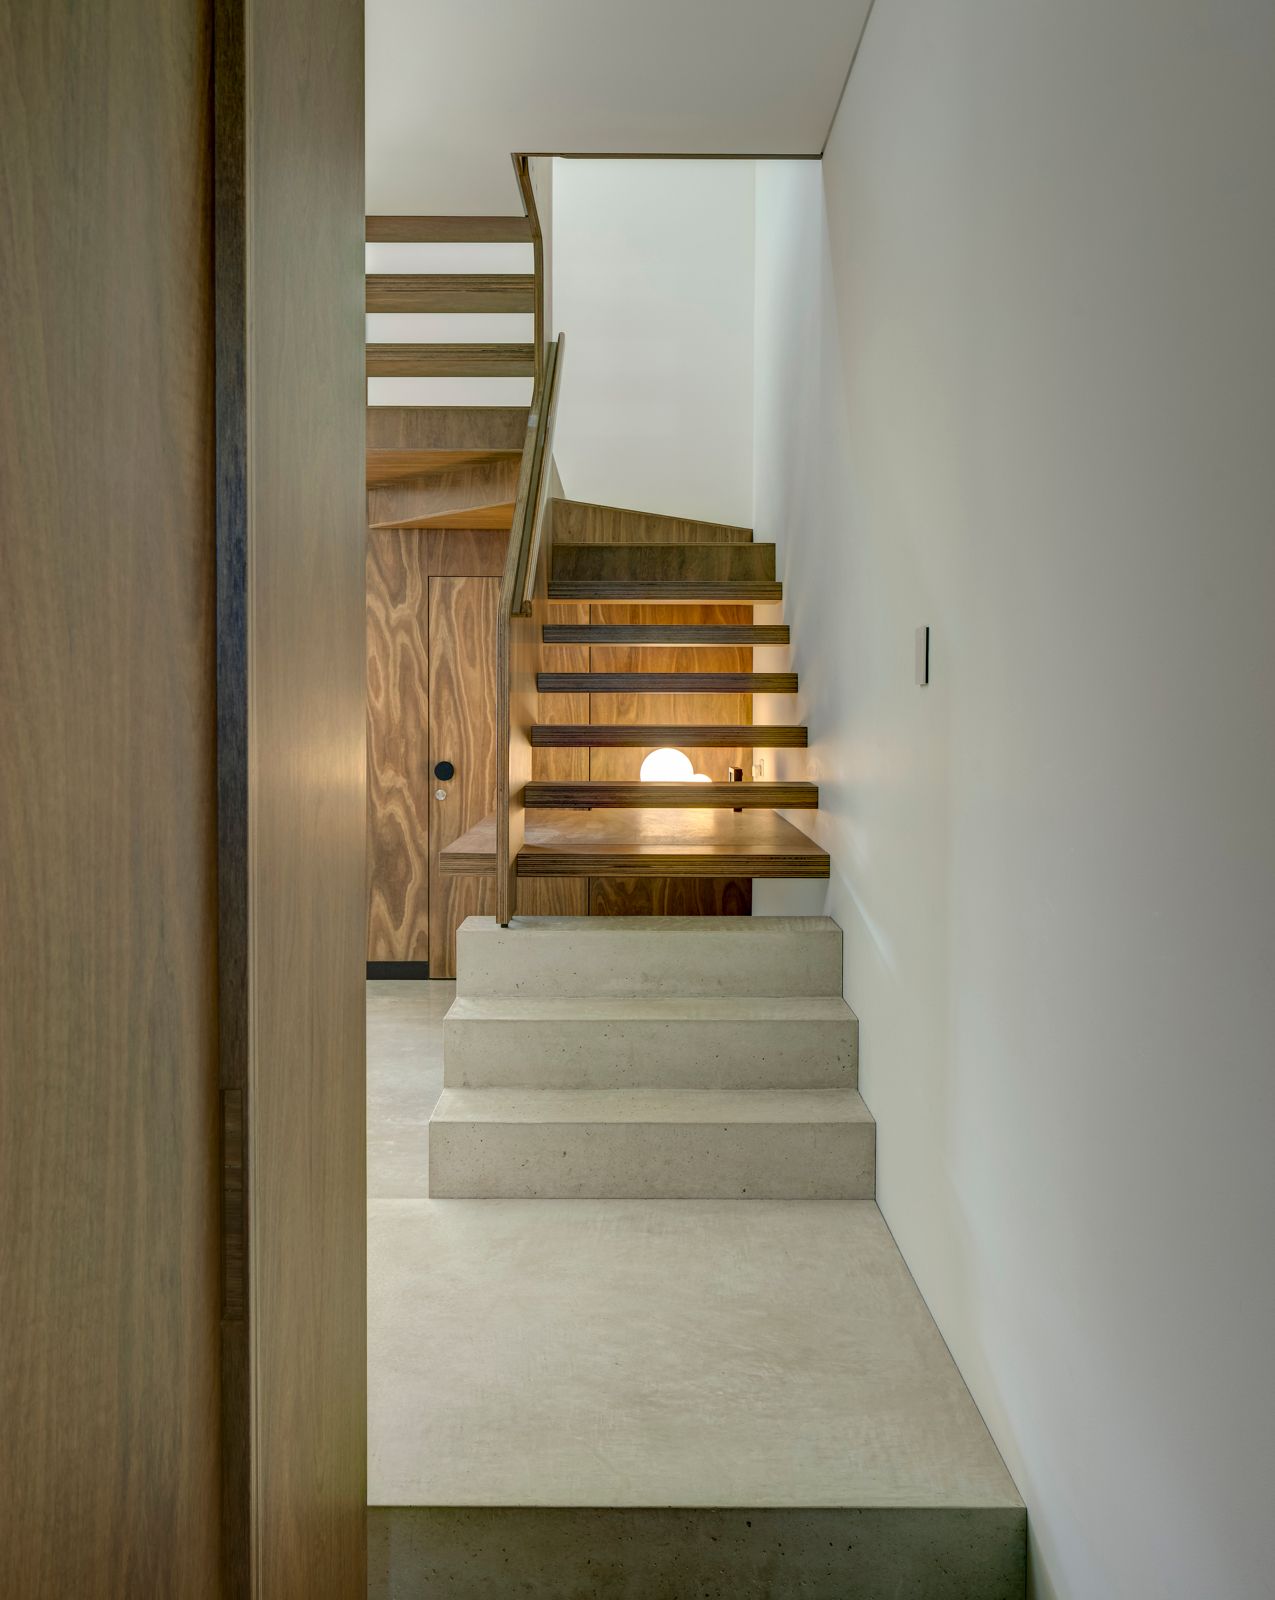 Sky House by Marra+Yeh Architects showing feature staircase